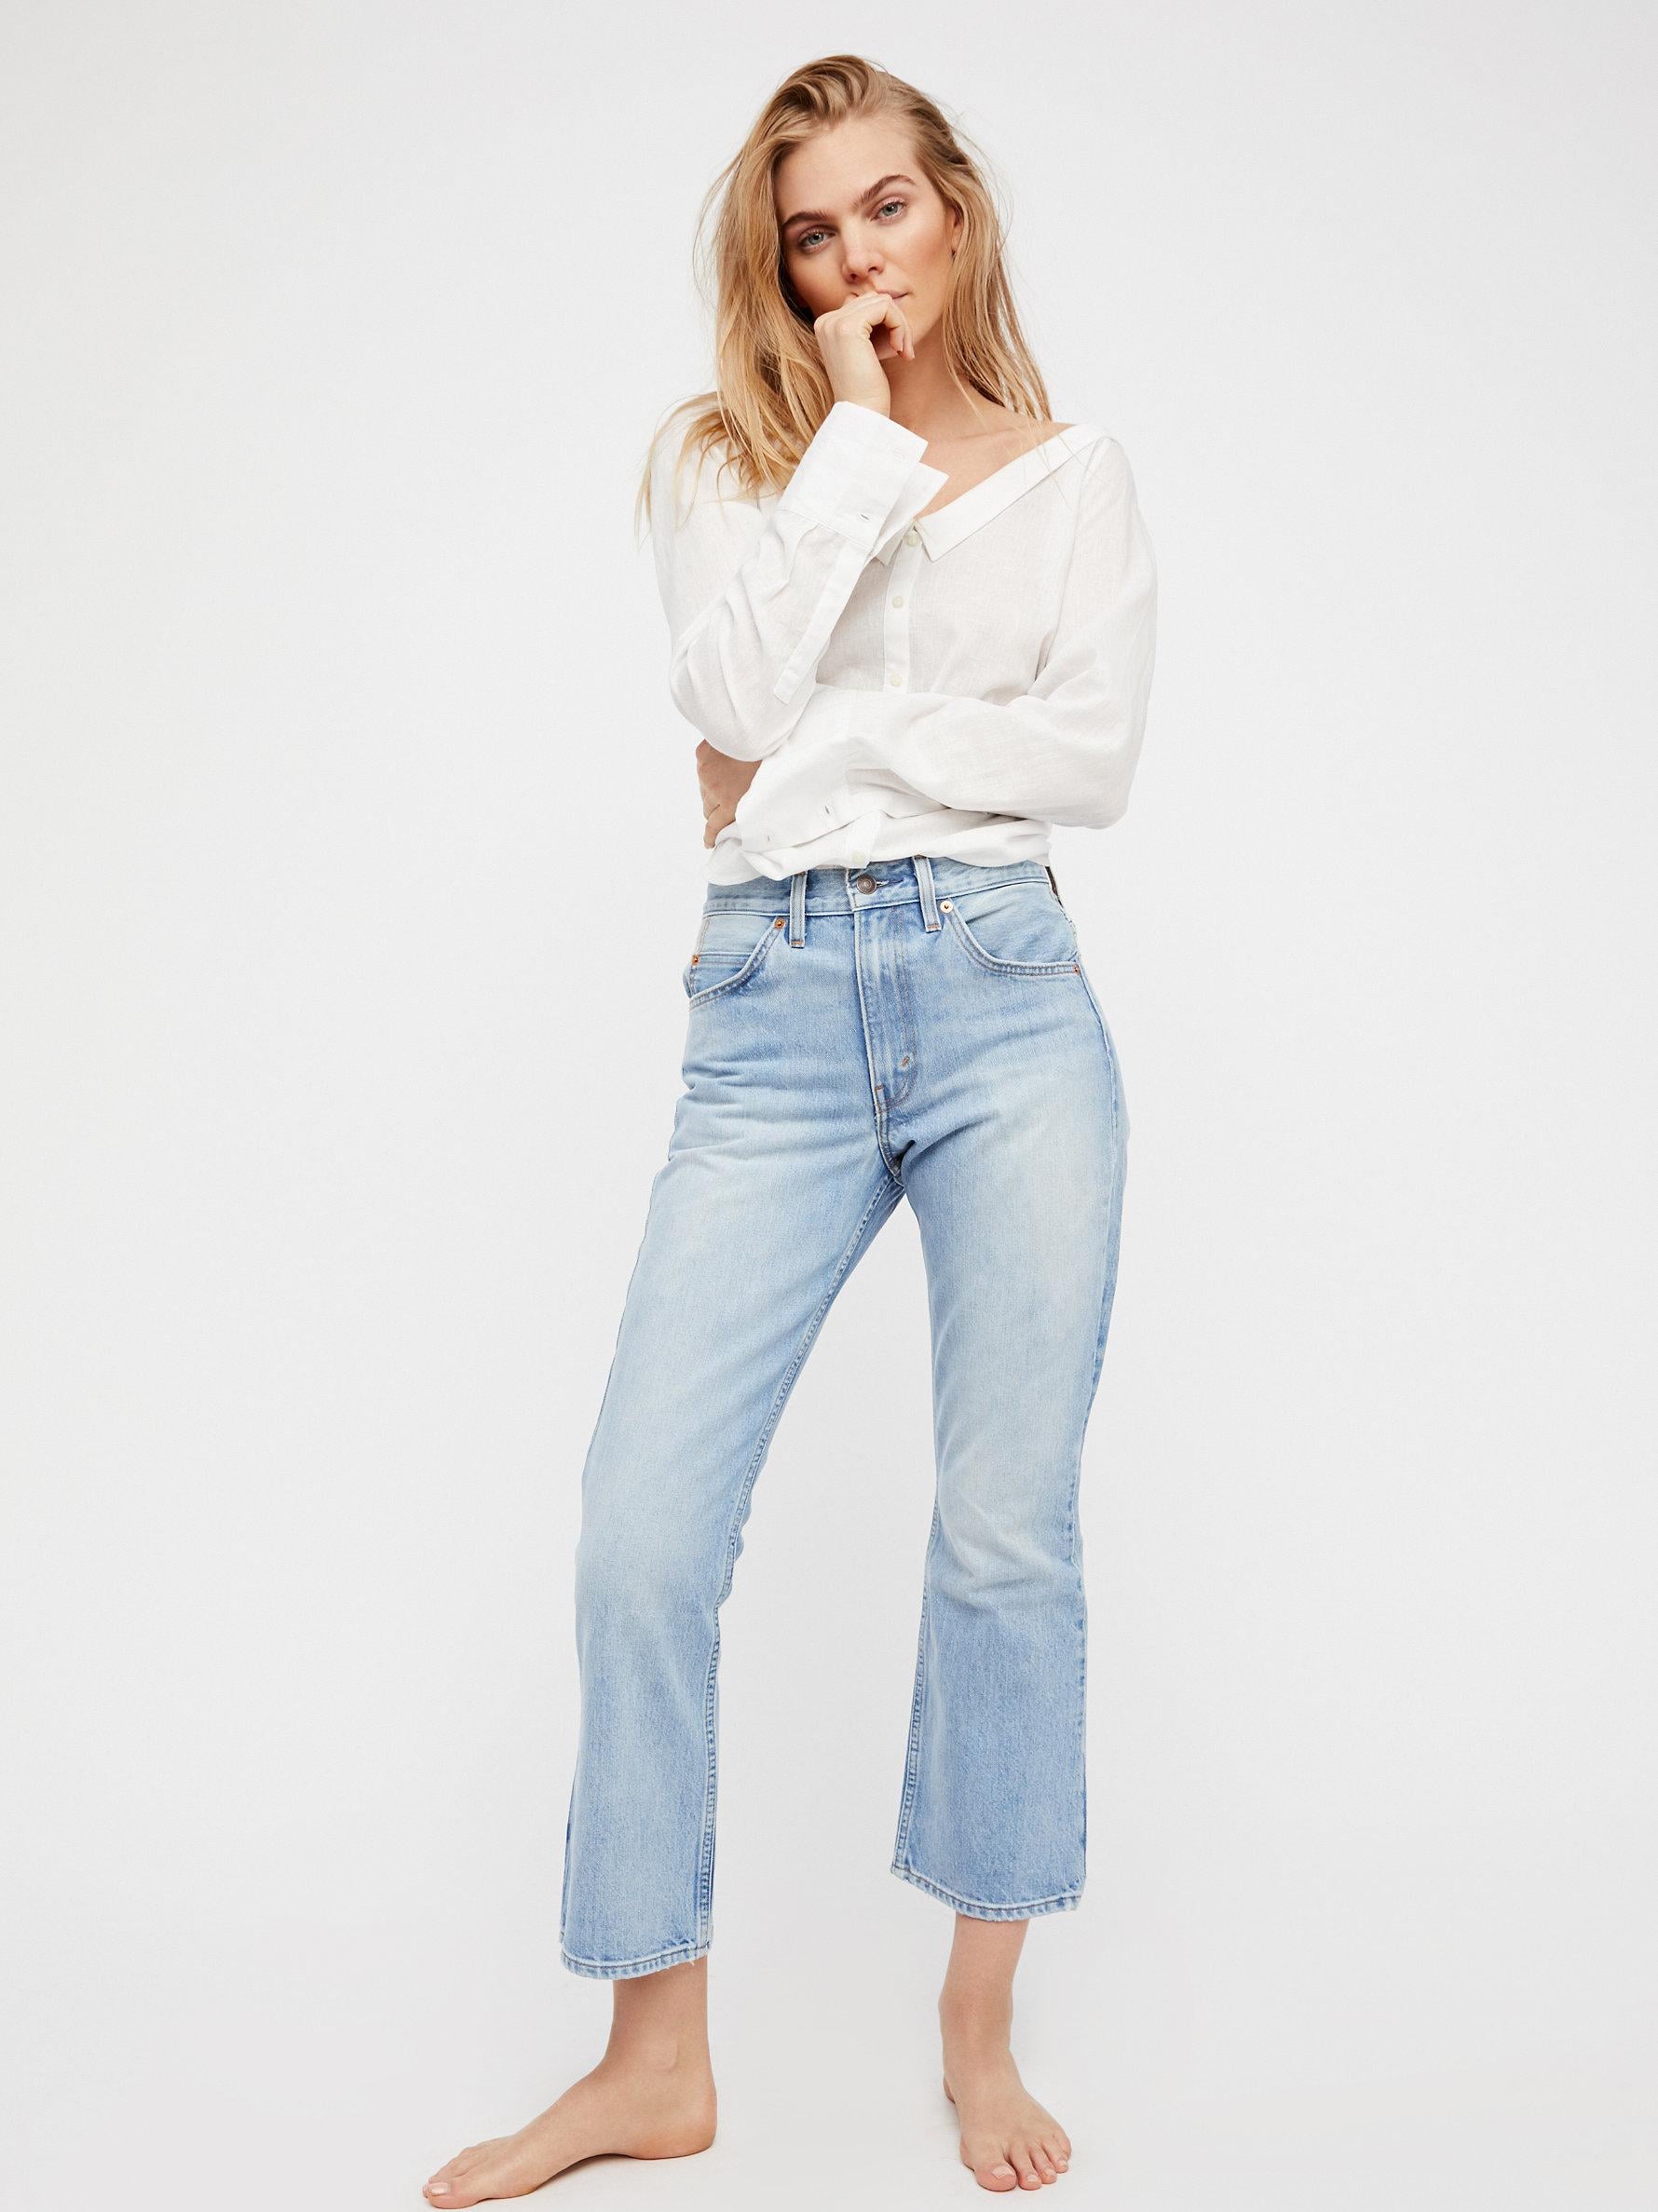 Levi's 517 Cropped Boot Cut Jeans | 20 Flattering Pairs of Cropped Jeans  That Will Make You Say Hallelujah | POPSUGAR Fashion Photo 23